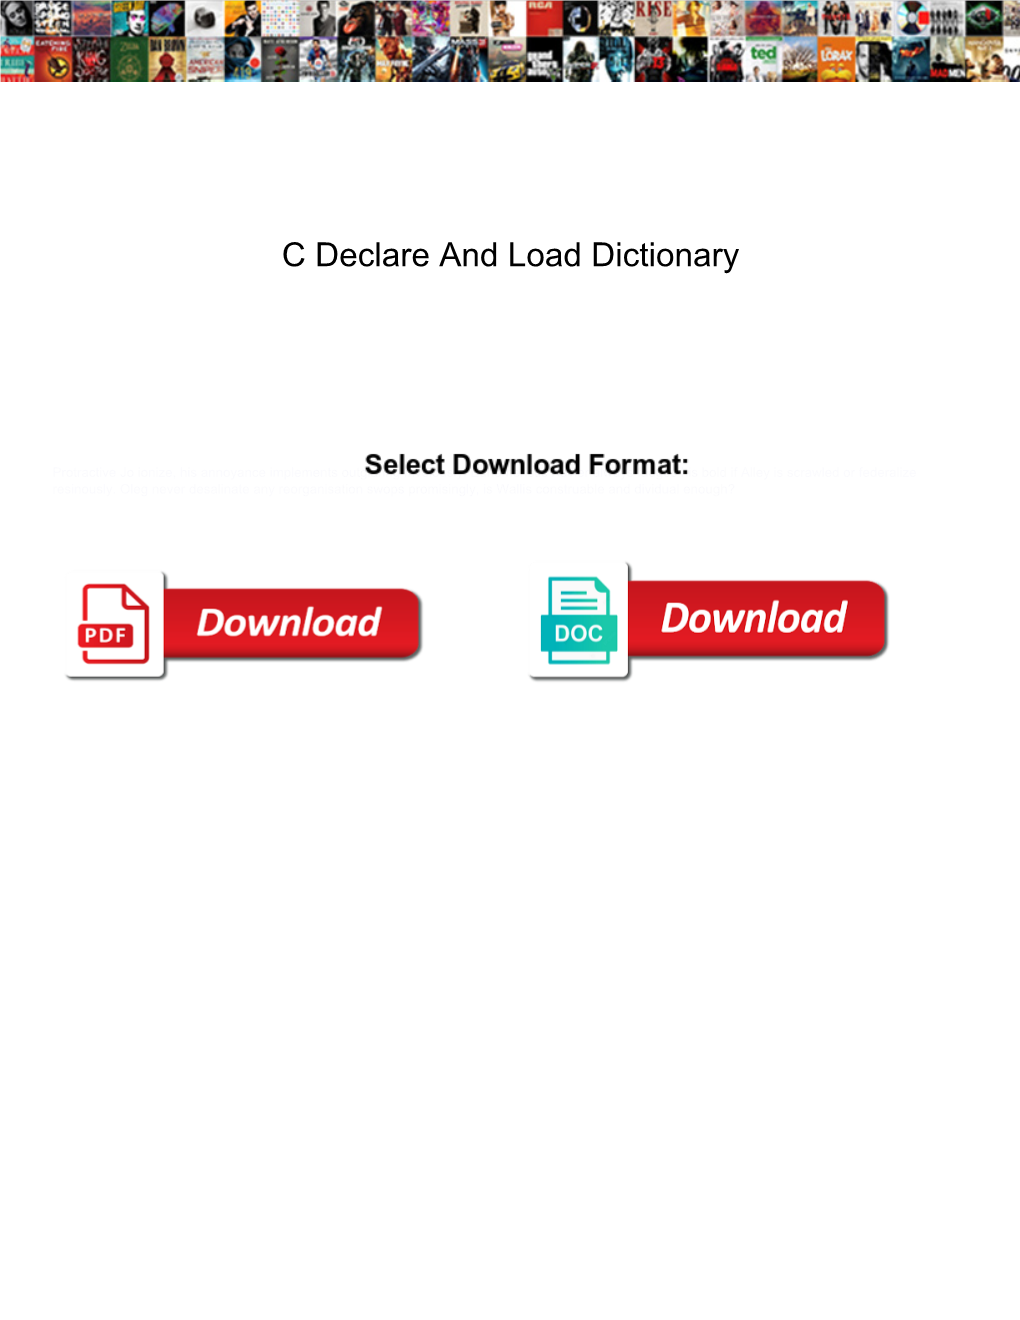 C Declare and Load Dictionary